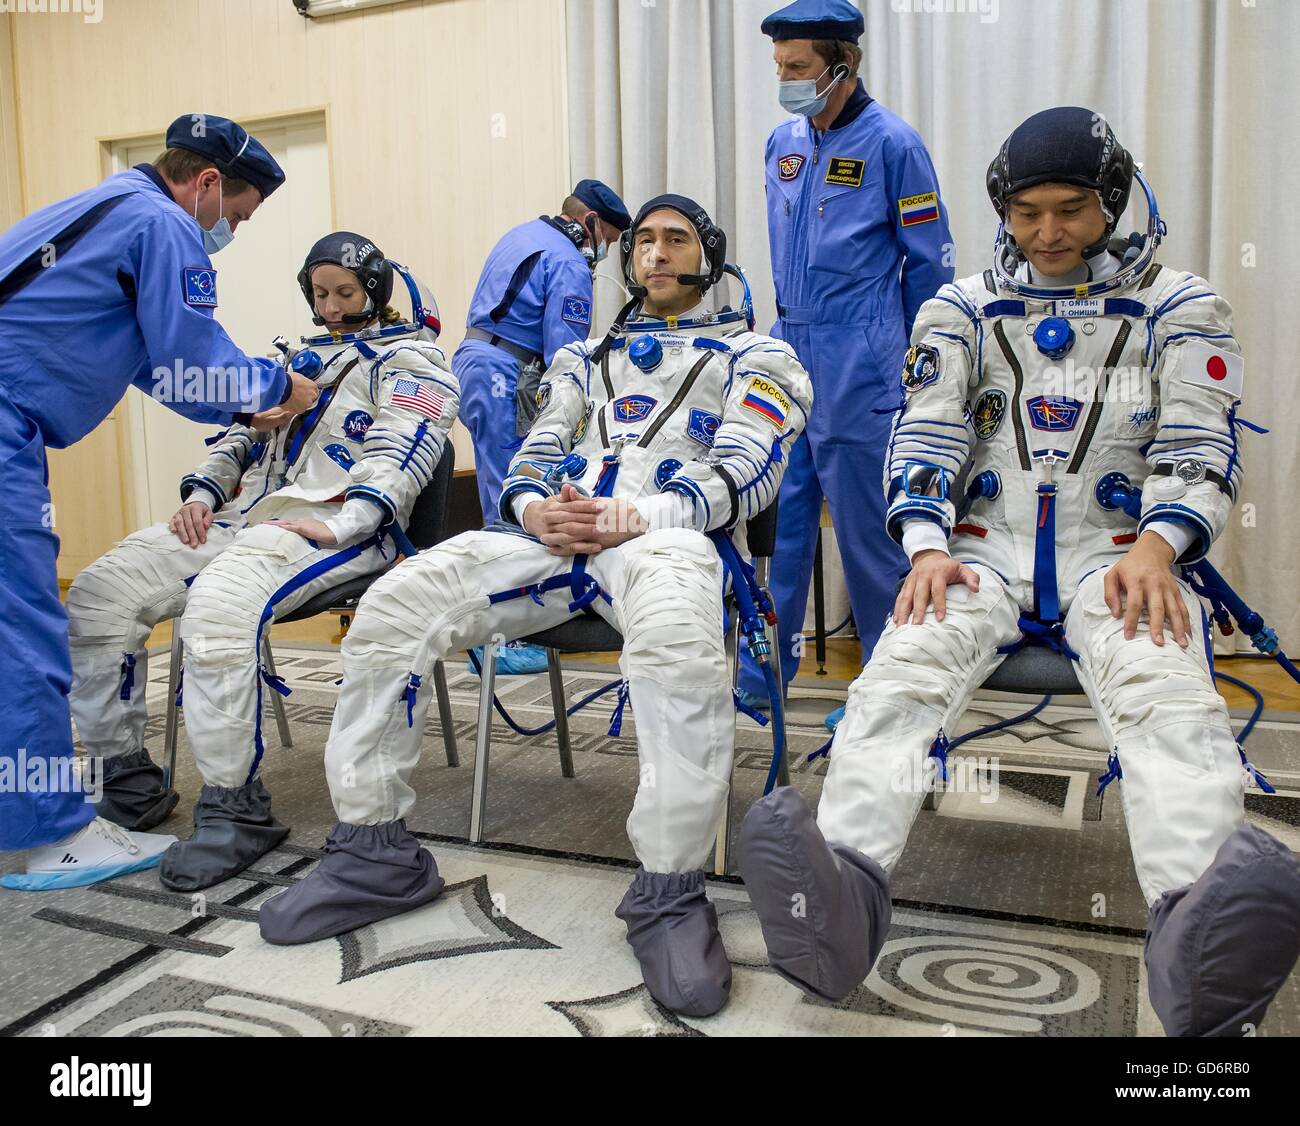 International Space Station Expedition 48 prime crew members have their Russian Sokol launch and entry suits pressure checked before launch at the Baikonur Cosmodrome July 7, 2016 in Kazakhstan. Left to Right: American astronaut Kate Rubens, Russian cosmonaut Anatoly Ivanishin, and Japanese astronaut Takuya Onishi. Stock Photo